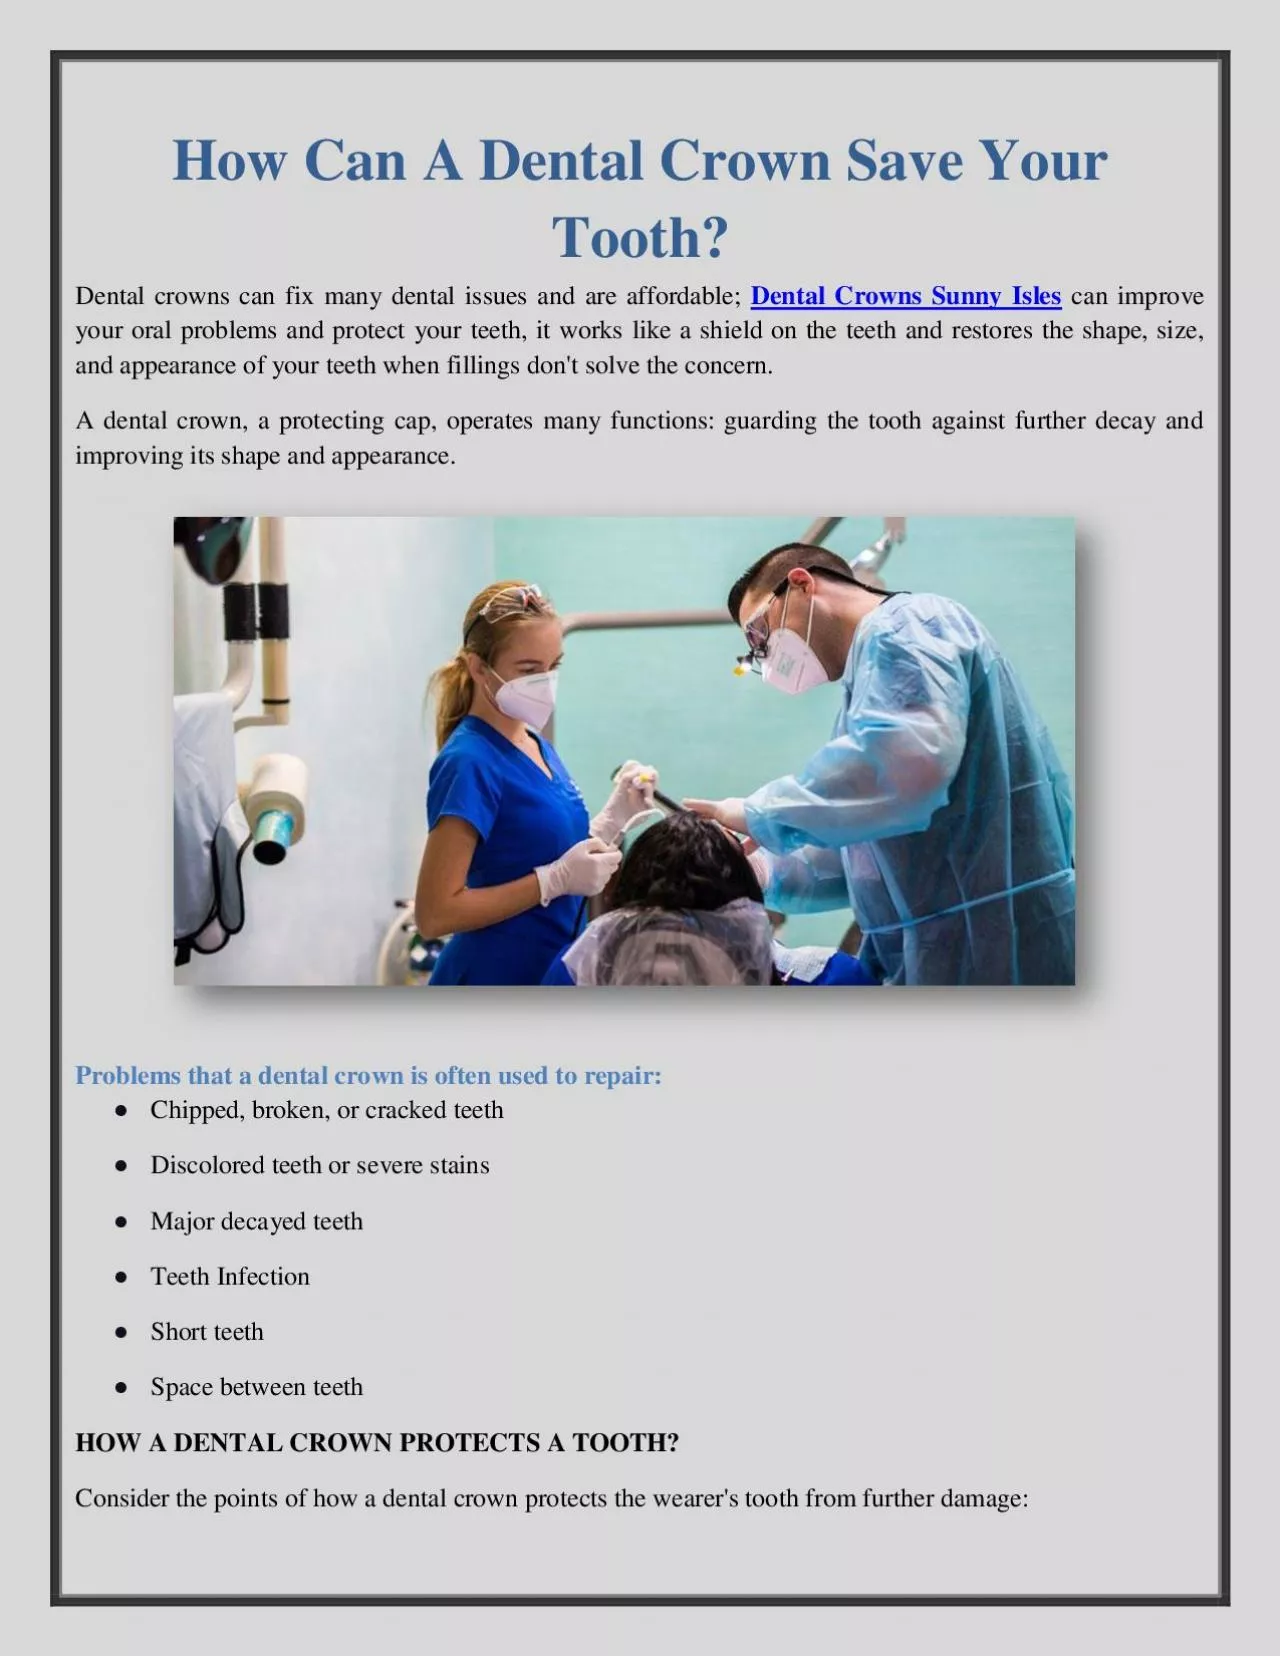 How Can A Dental Crown Save Your Tooth?